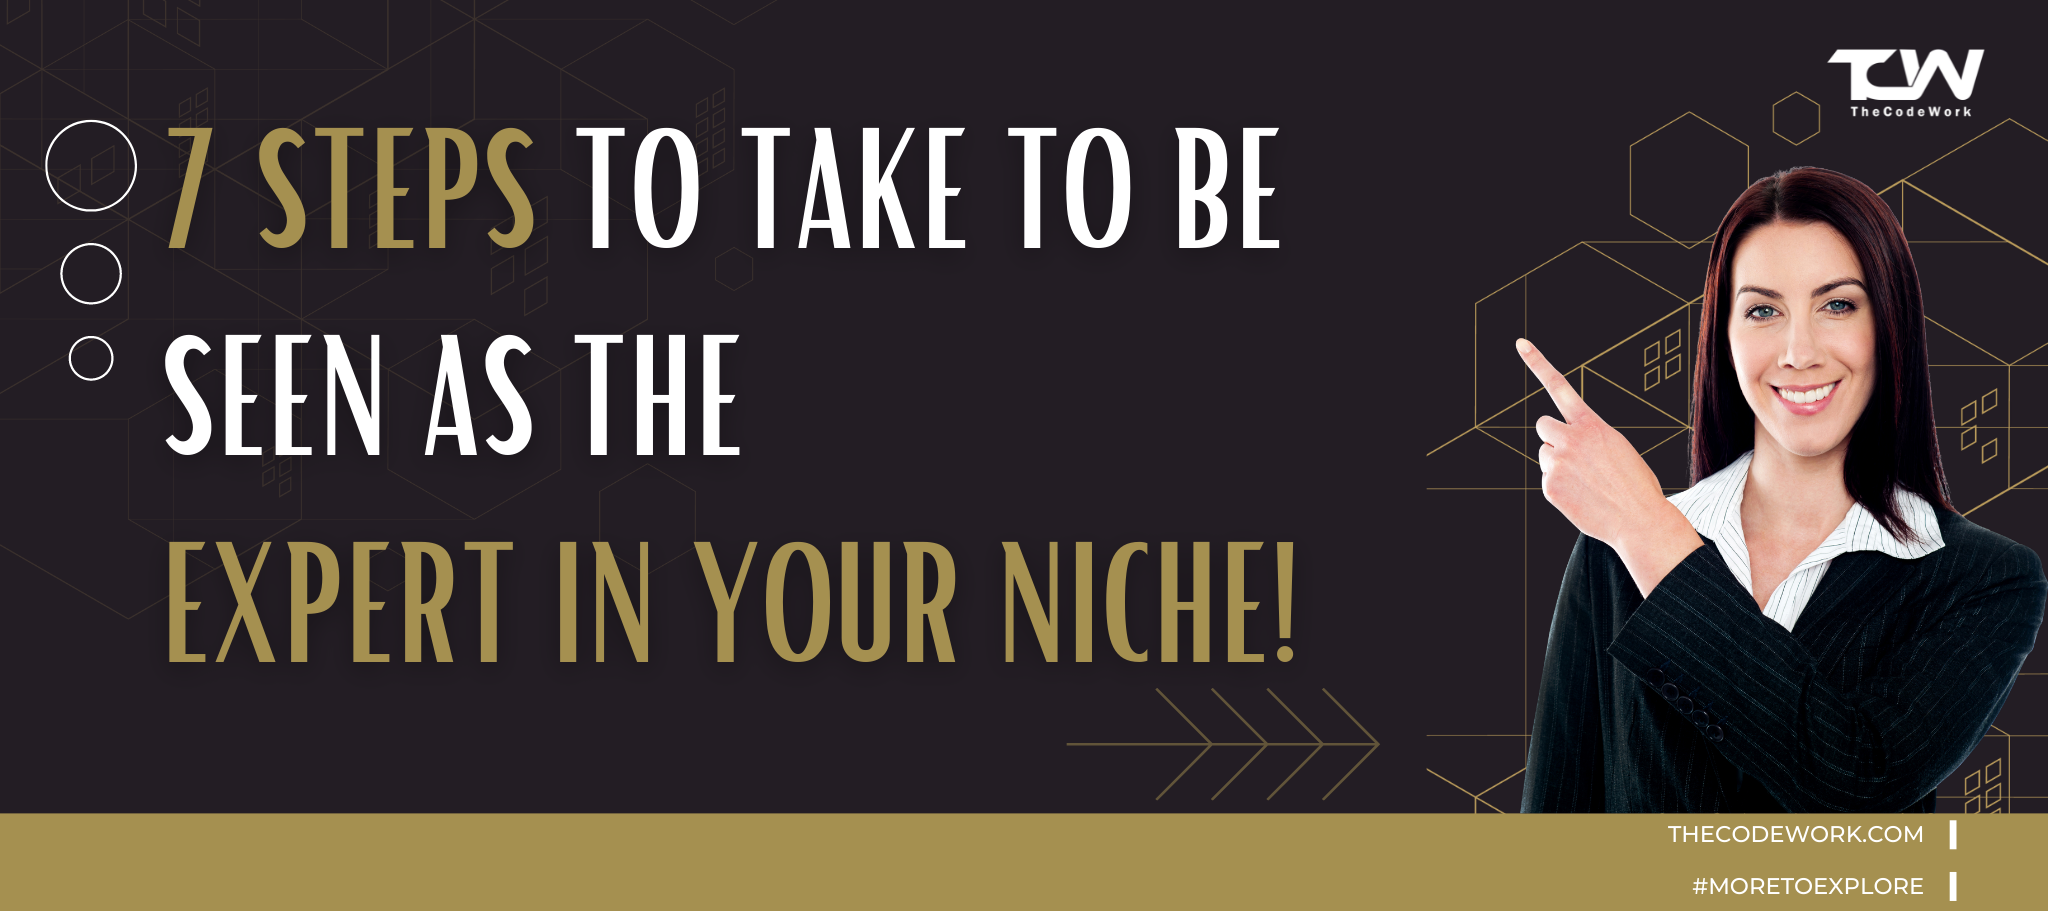 7 Steps to Take to be Seen as the Expert in your Niche! 